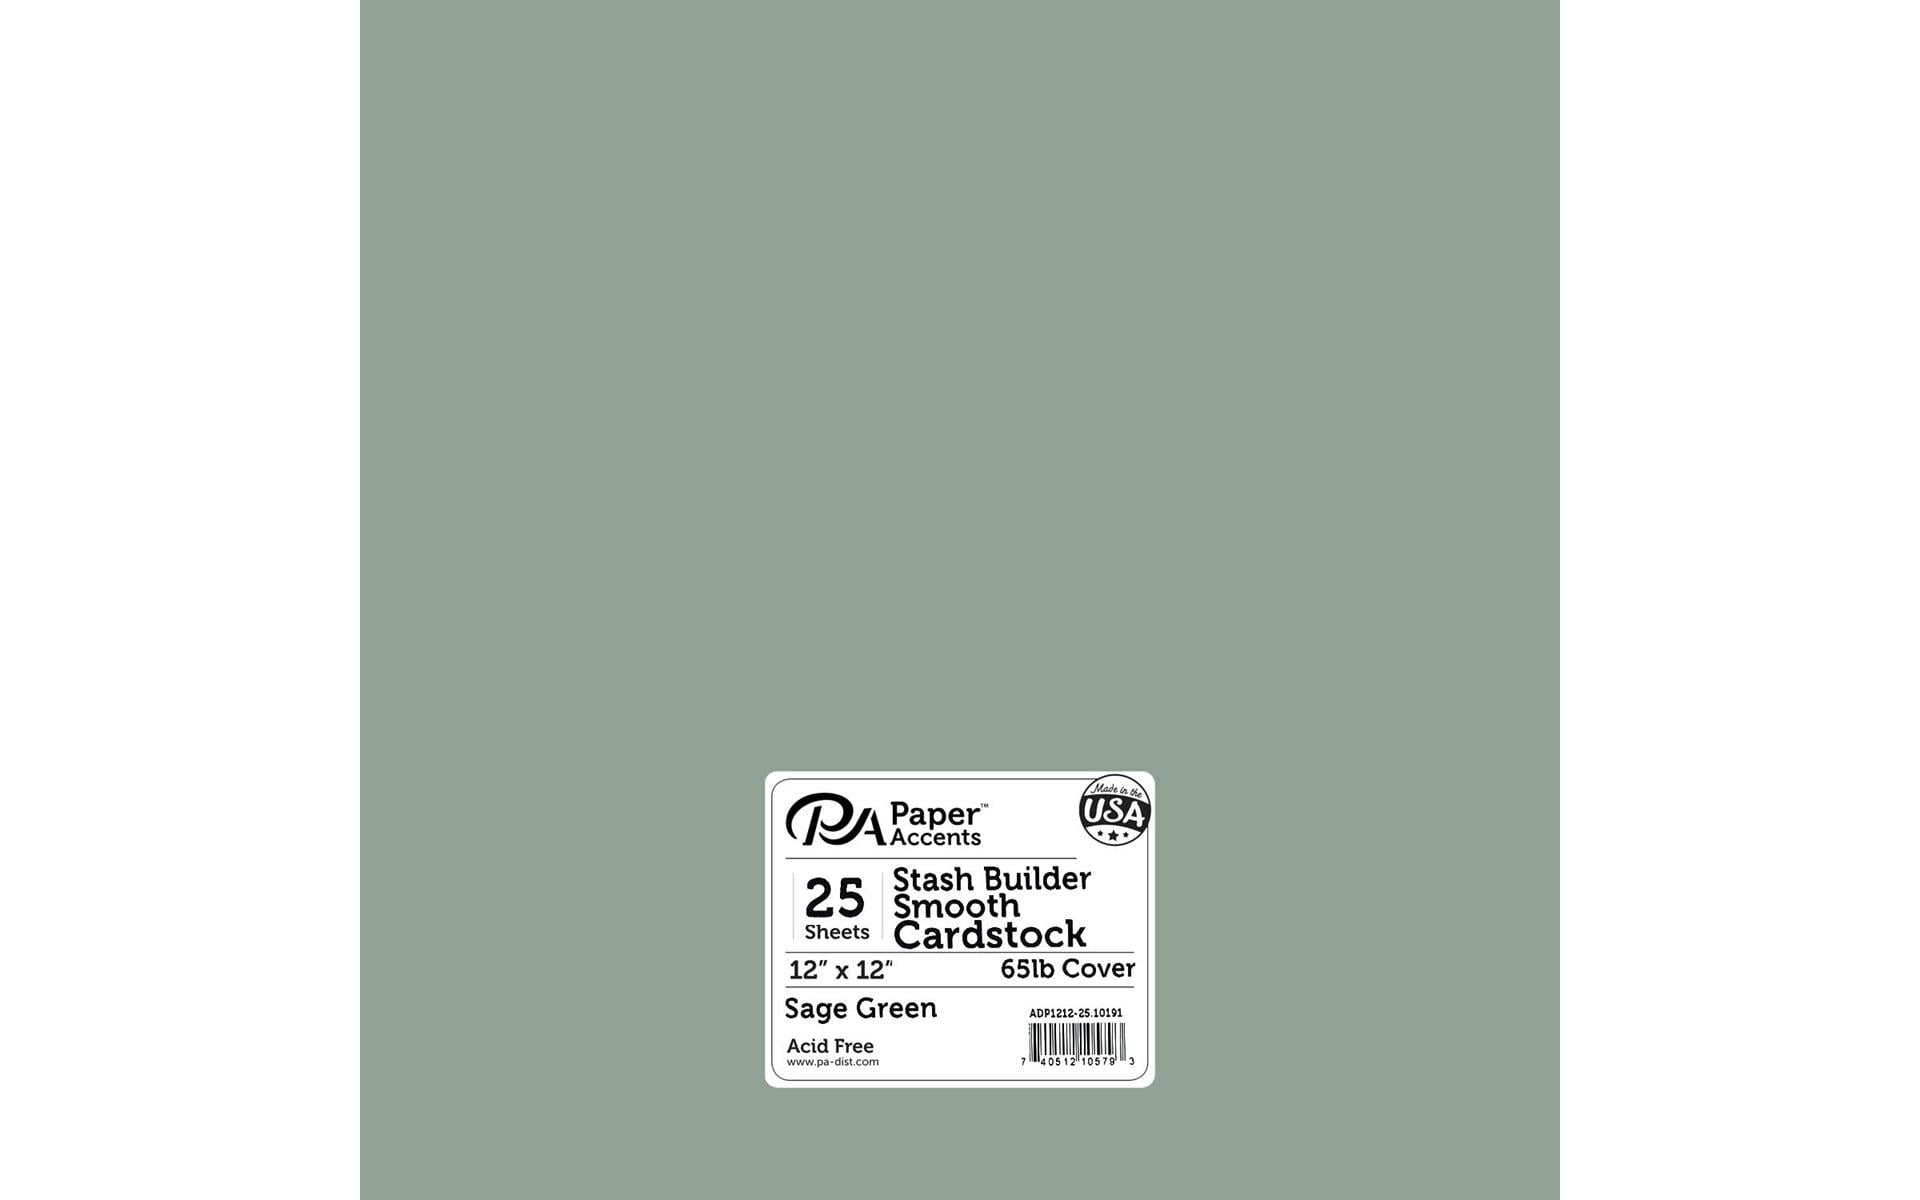 PA Paper Accents Linen Cardstock 12 x 12 Bright White, 80lb colored  cardstock paper for card making, scrapbooking, printing, quilling and  crafts, 25 piece pack